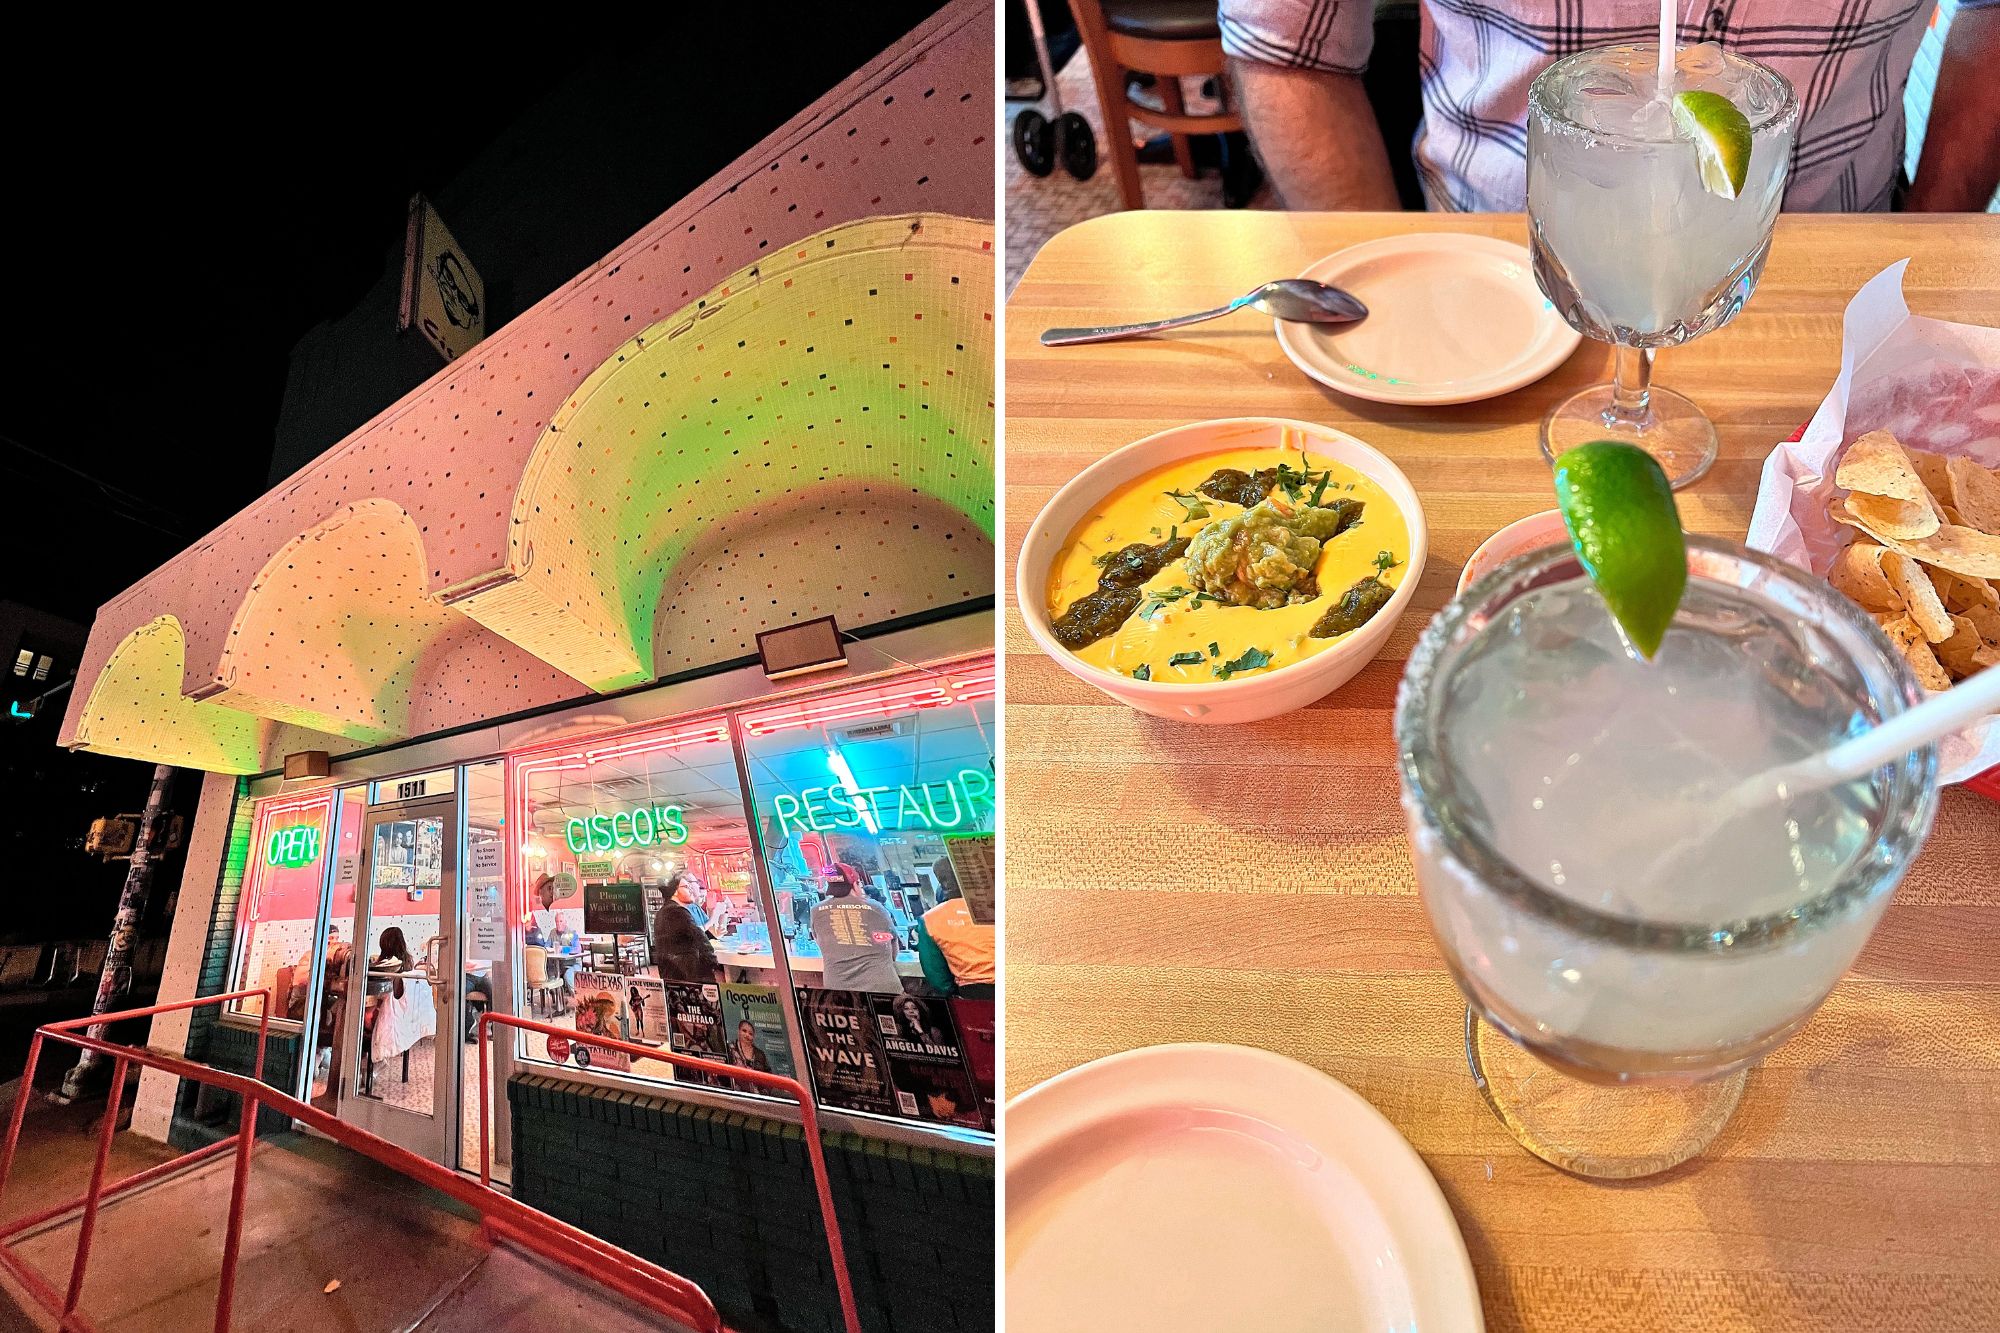 Exterior of Cisco's, and a margarita with queso